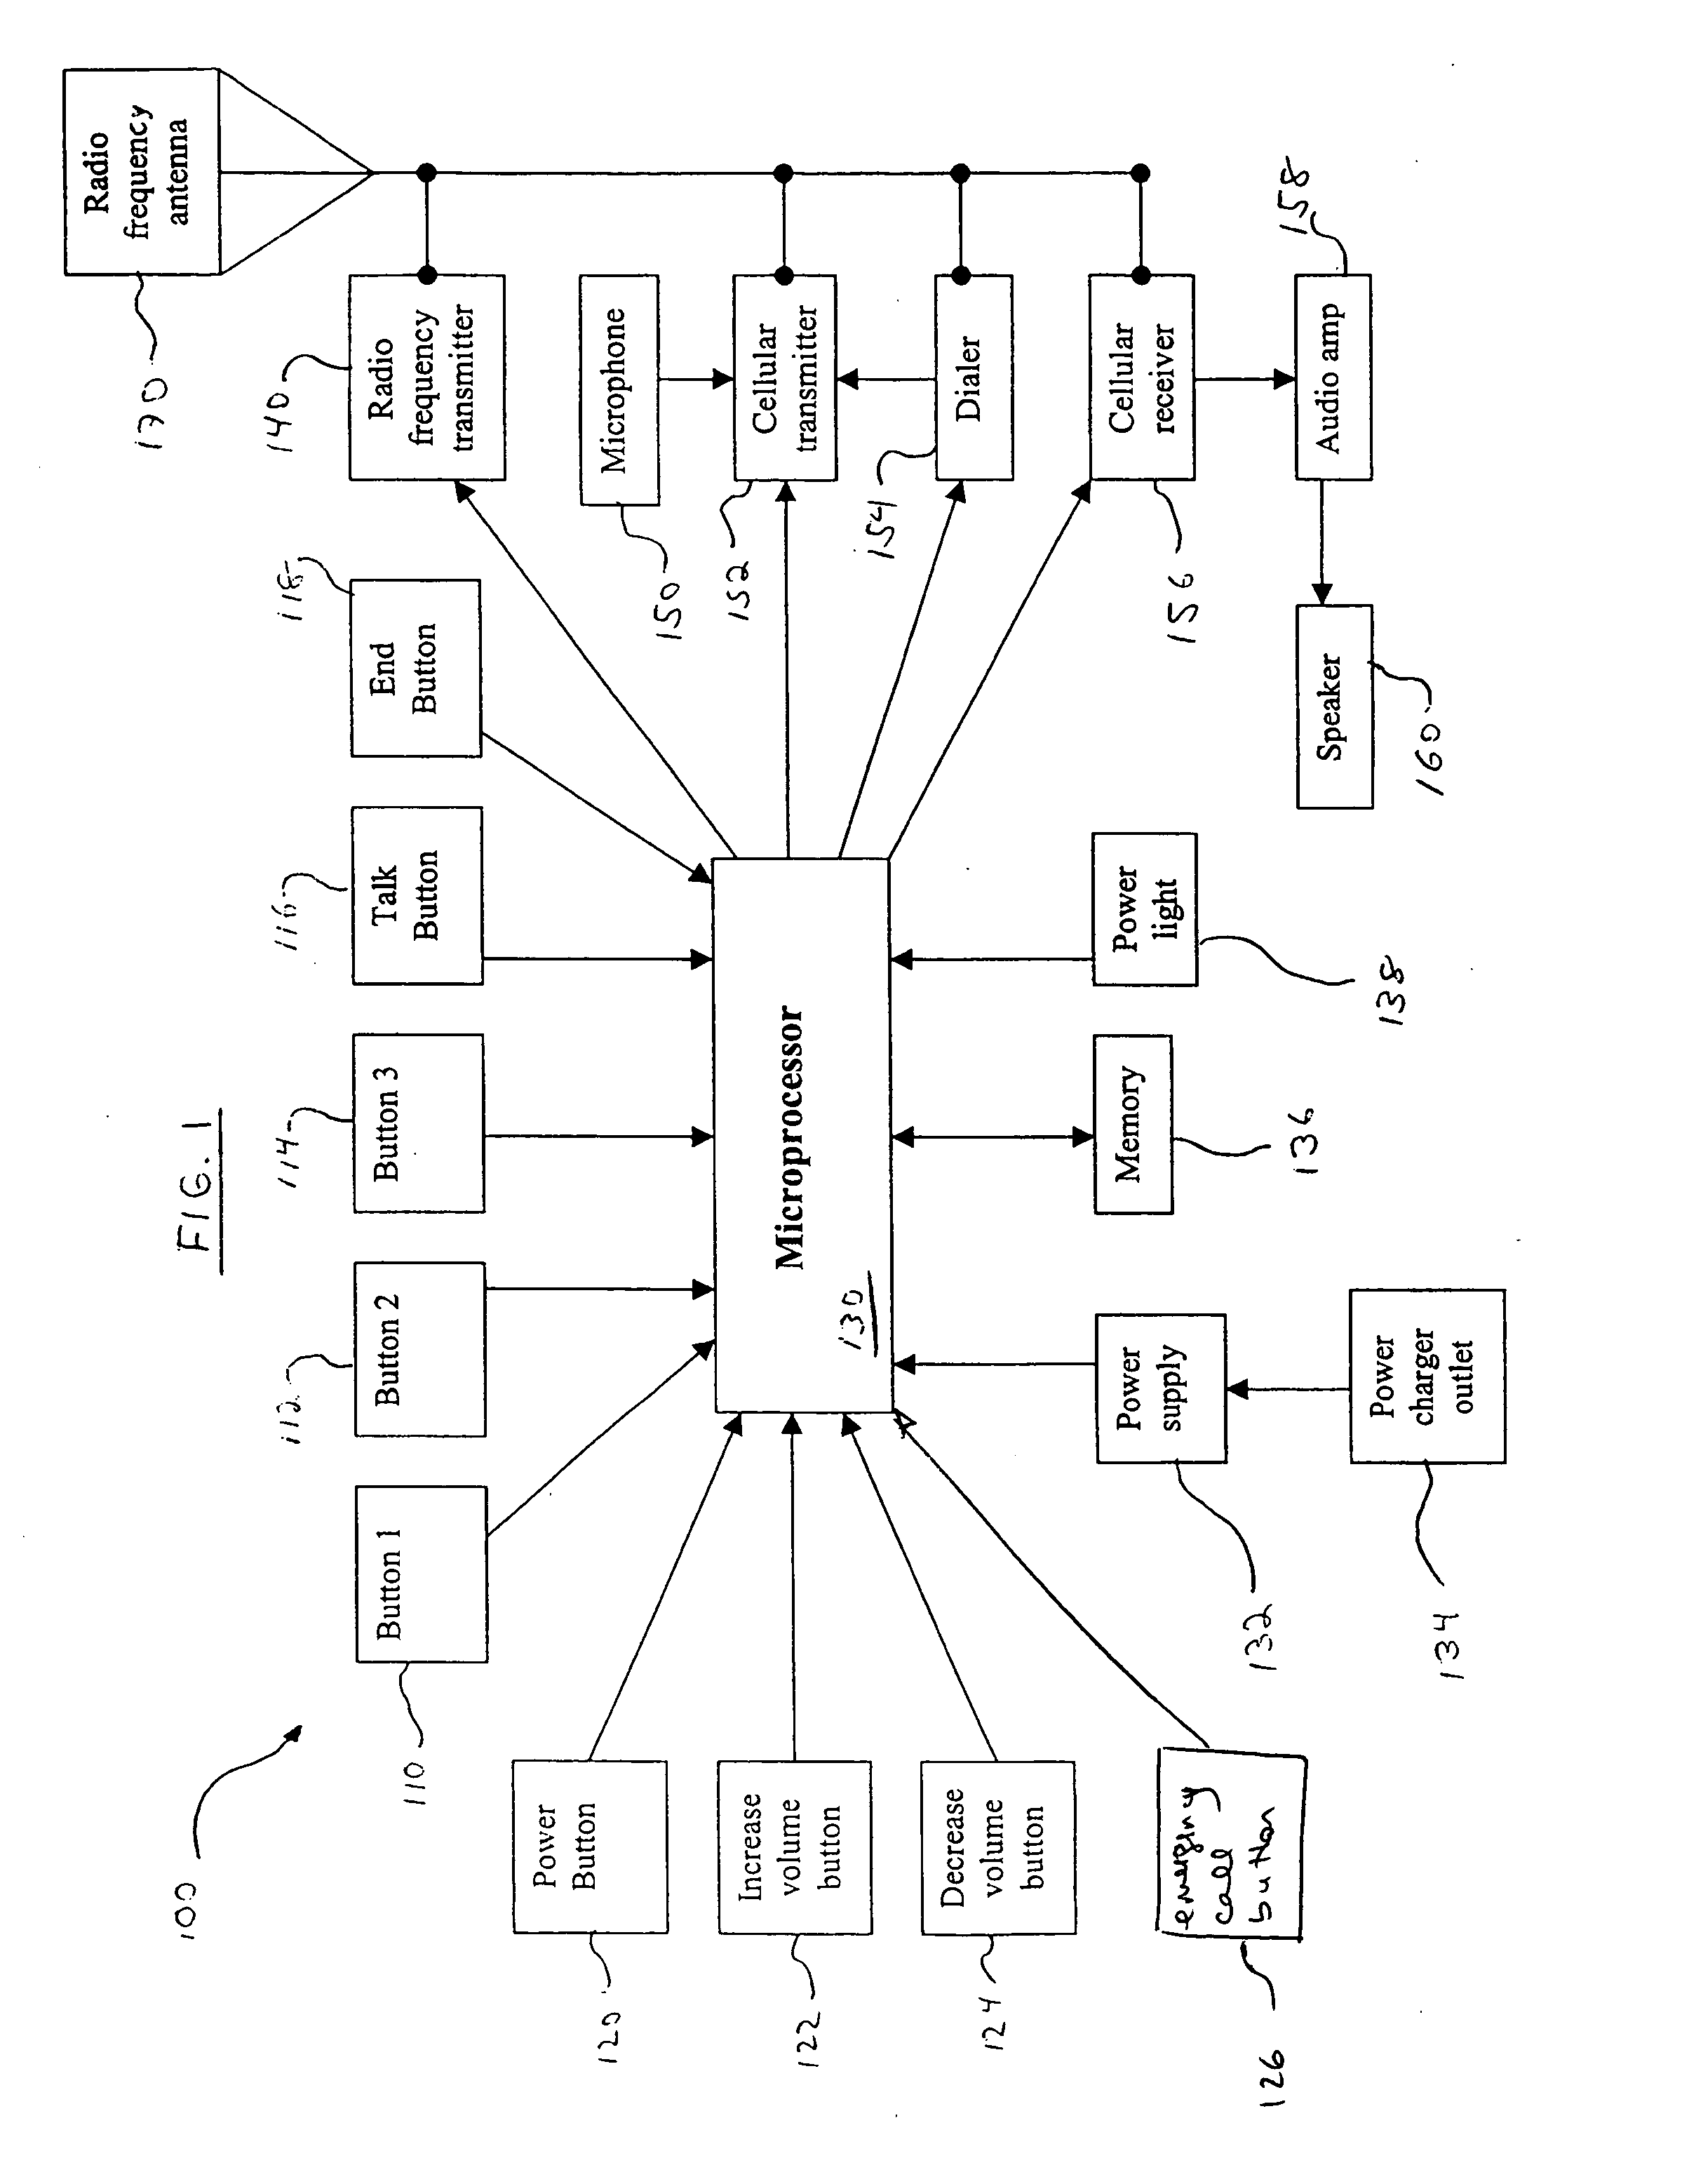 Method and system for emergency dialing of a wireless communication device